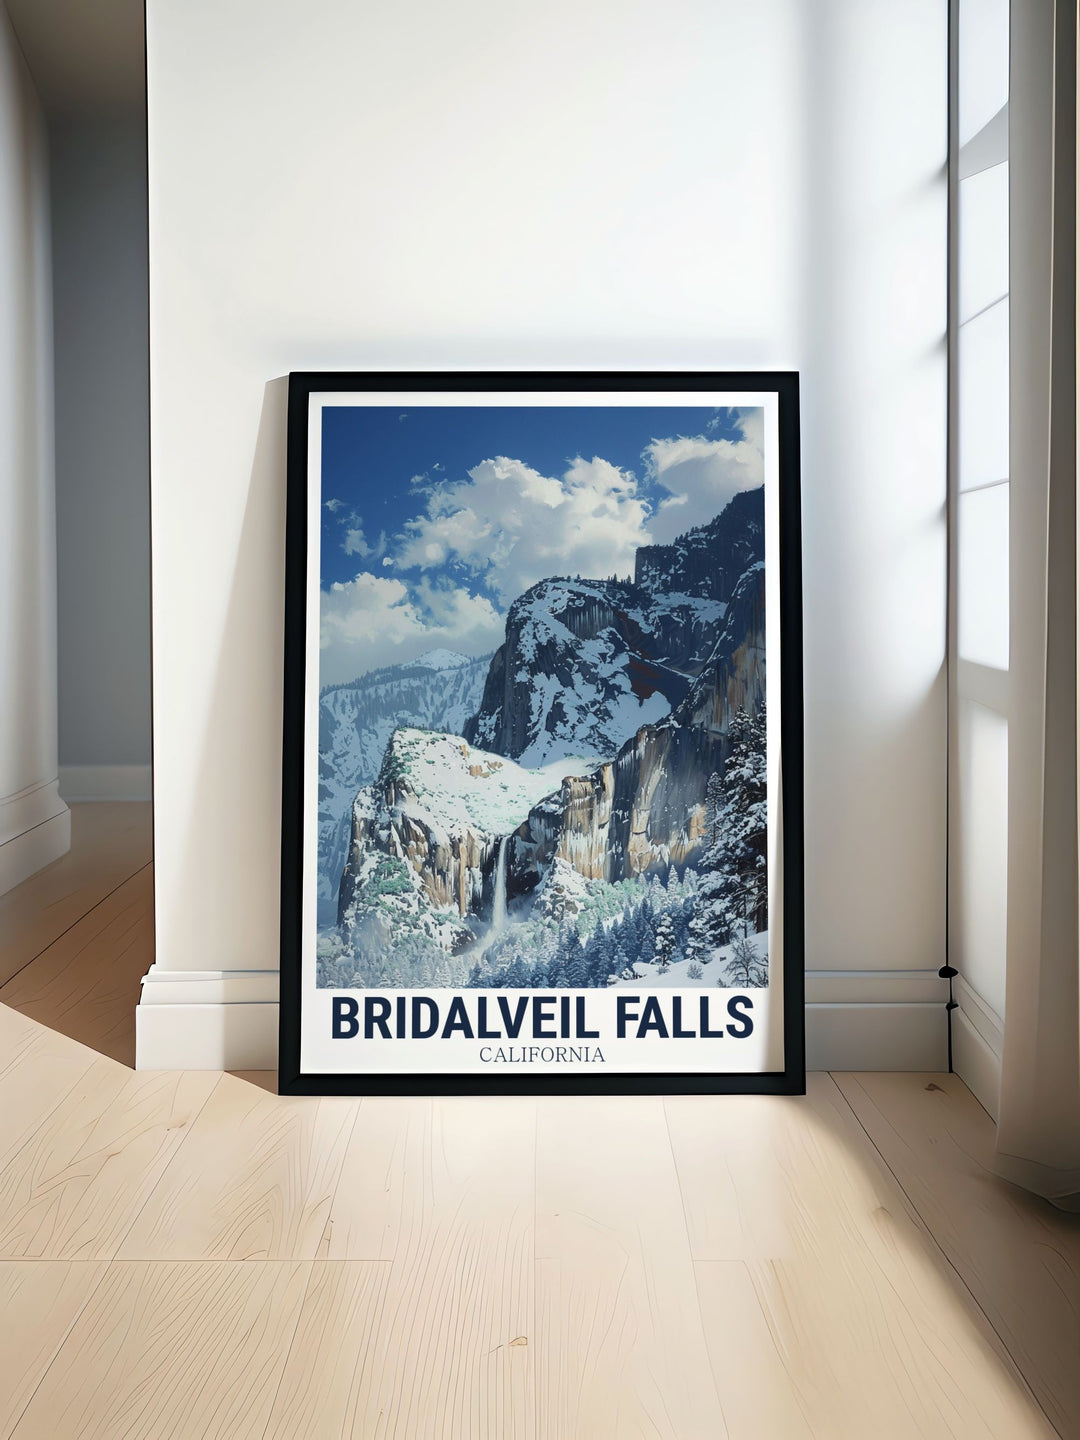 View from winter of Bridalveil Falls in Yosemite National Park captured in a beautiful California art print perfect for nature lovers and travel enthusiasts. This California print showcases the beauty of winter in one of the states most iconic landmarks ideal for home decor.